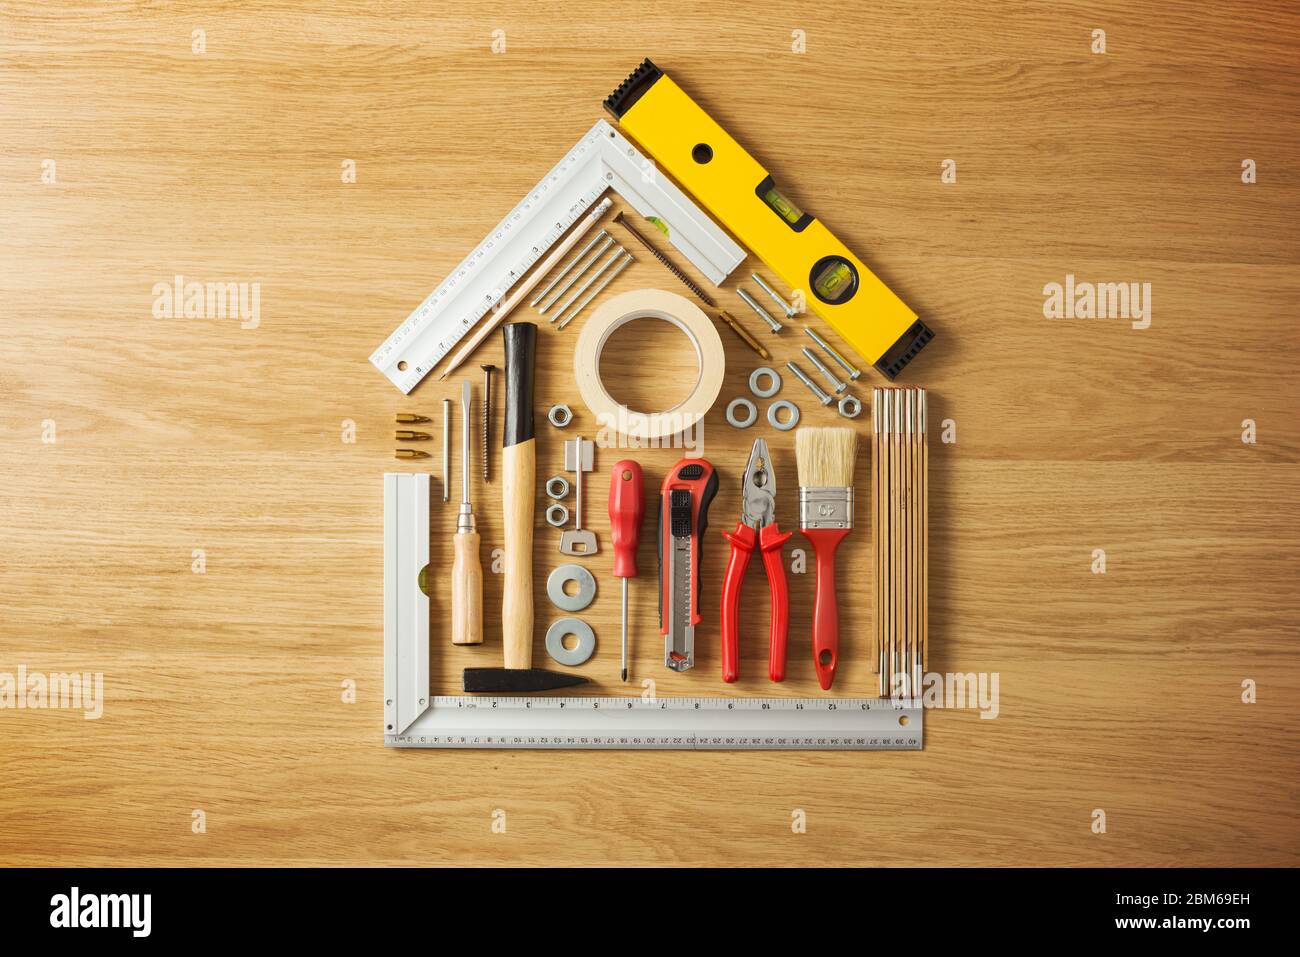 Conceptual house composed of DIY and construction tools on hardwood flooring, top view Stock Photo